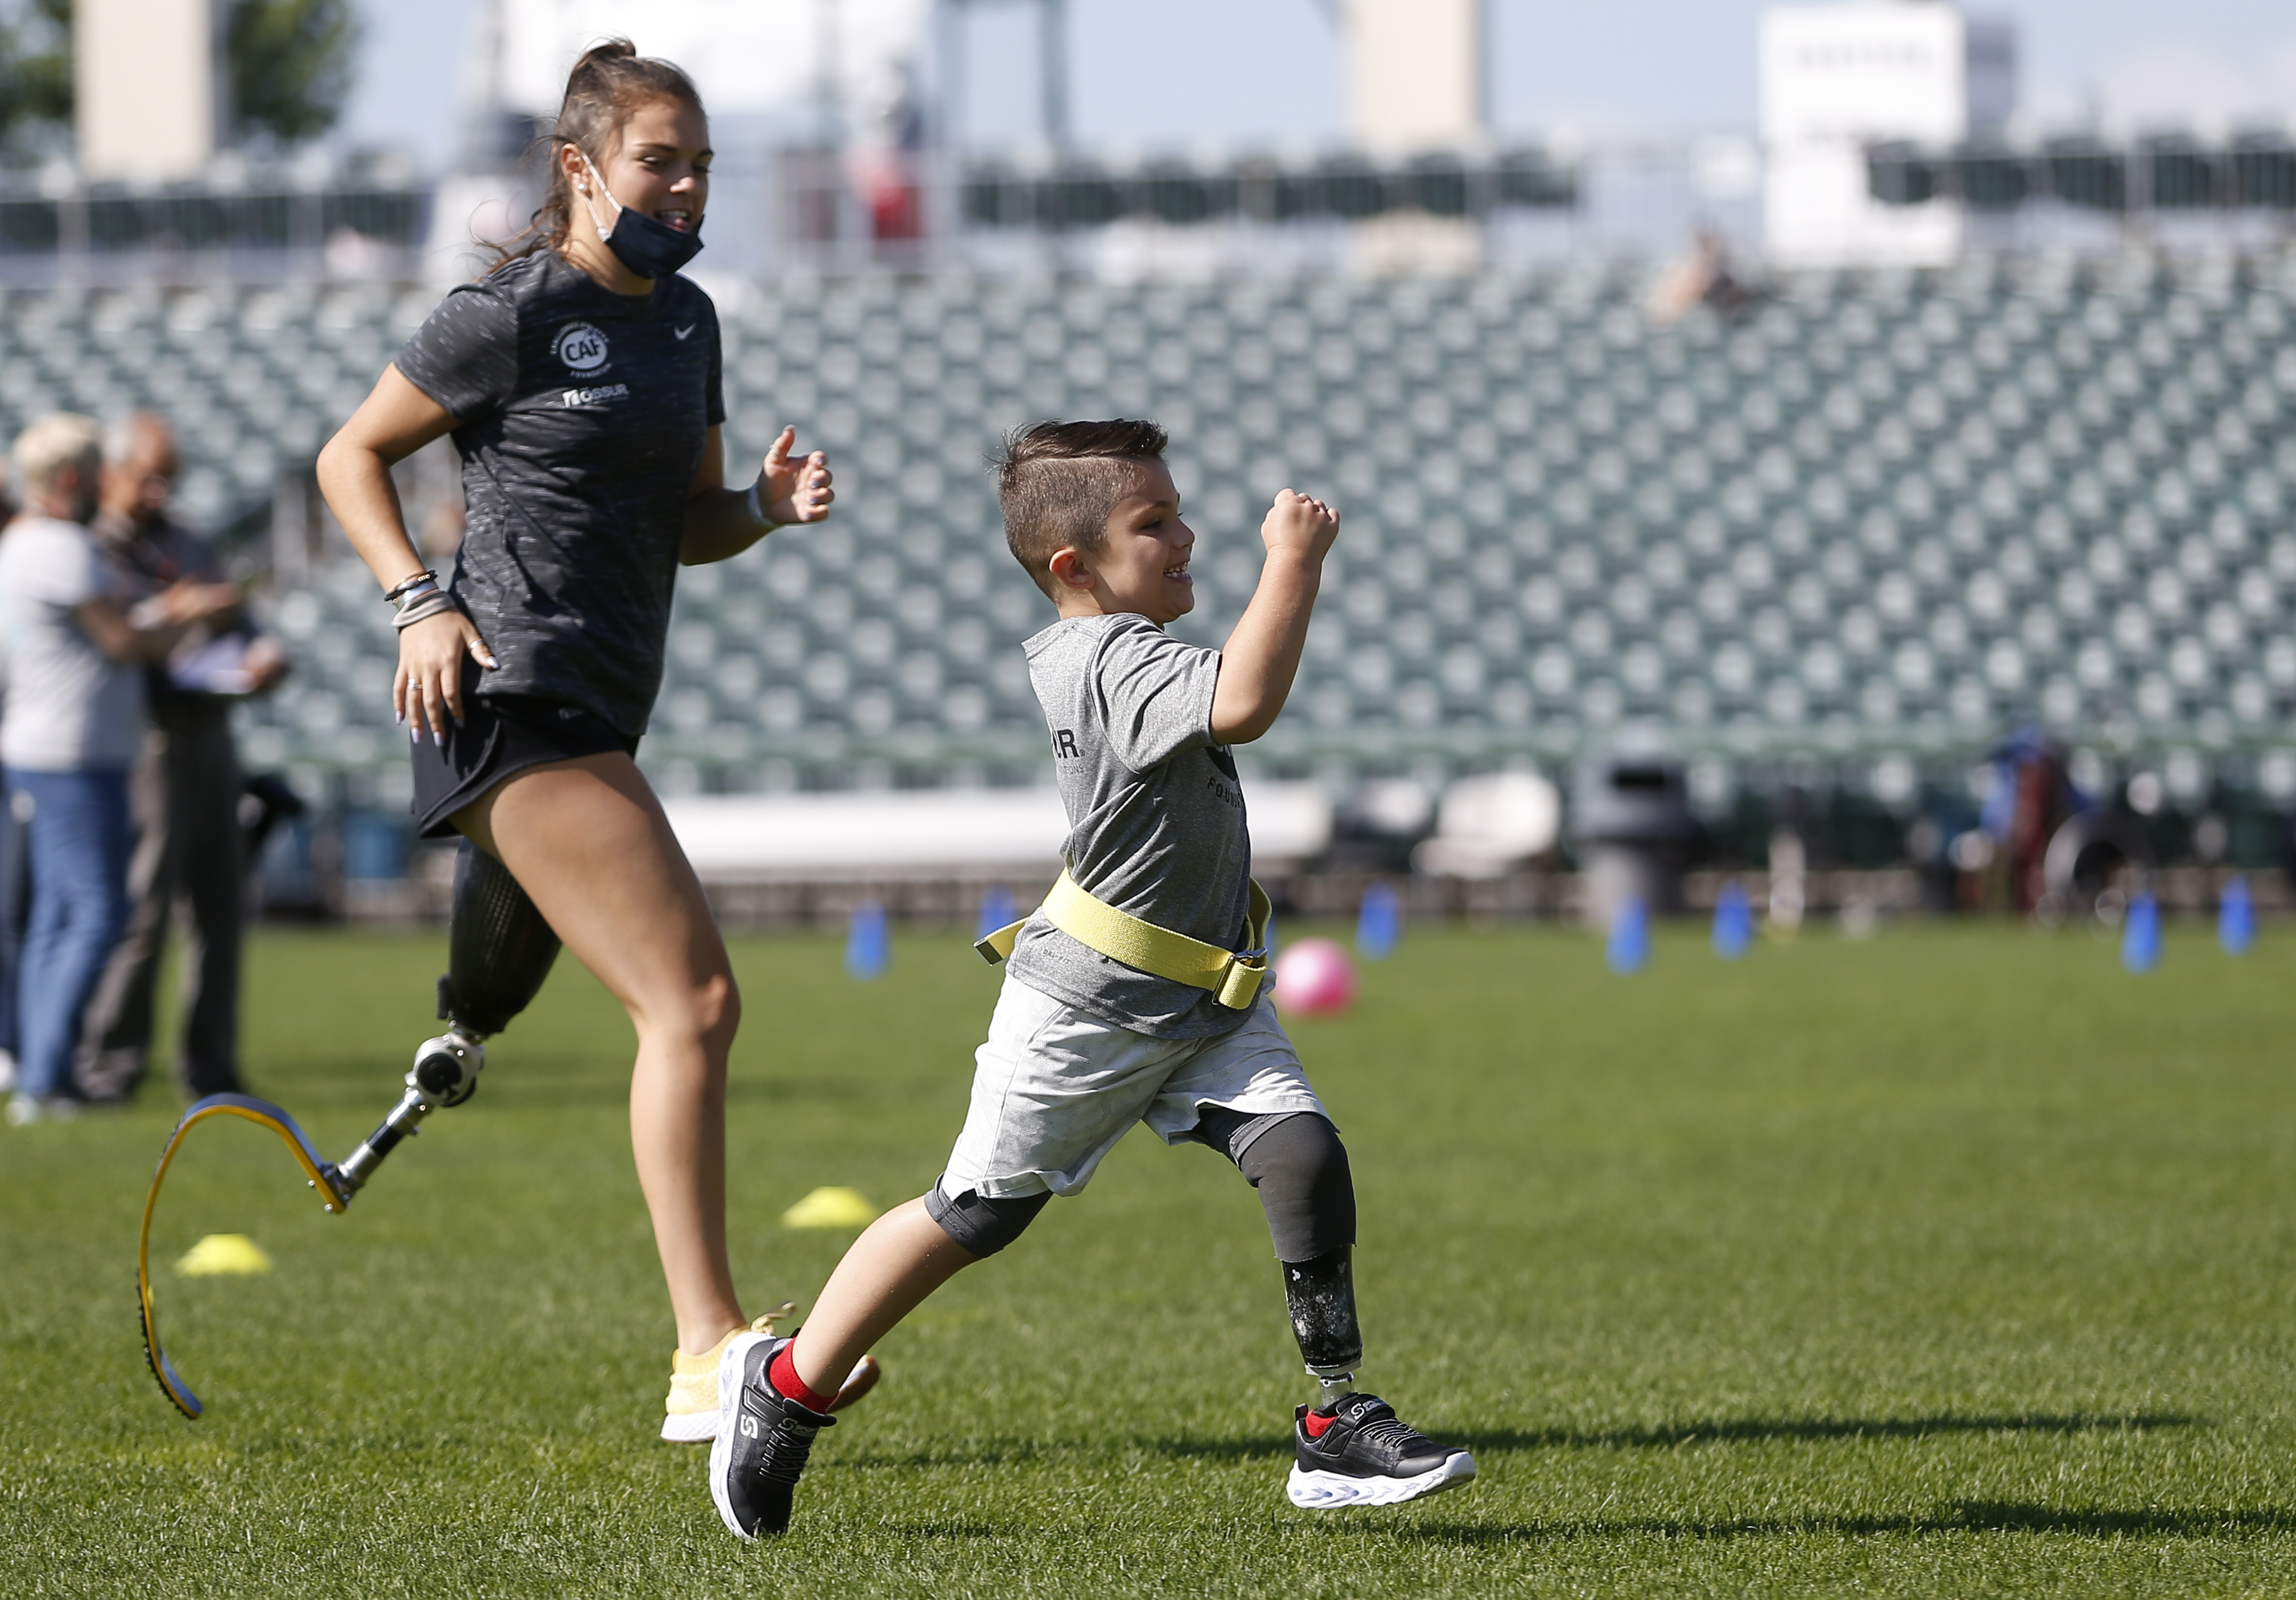 Isaak Depelteau, 6 (right) of Concord, NH, runs Paralympic athlete Noelle Lambert at the Ã–ssur and Challenged Athletes Foundation running and mobility clinic on Sunday.